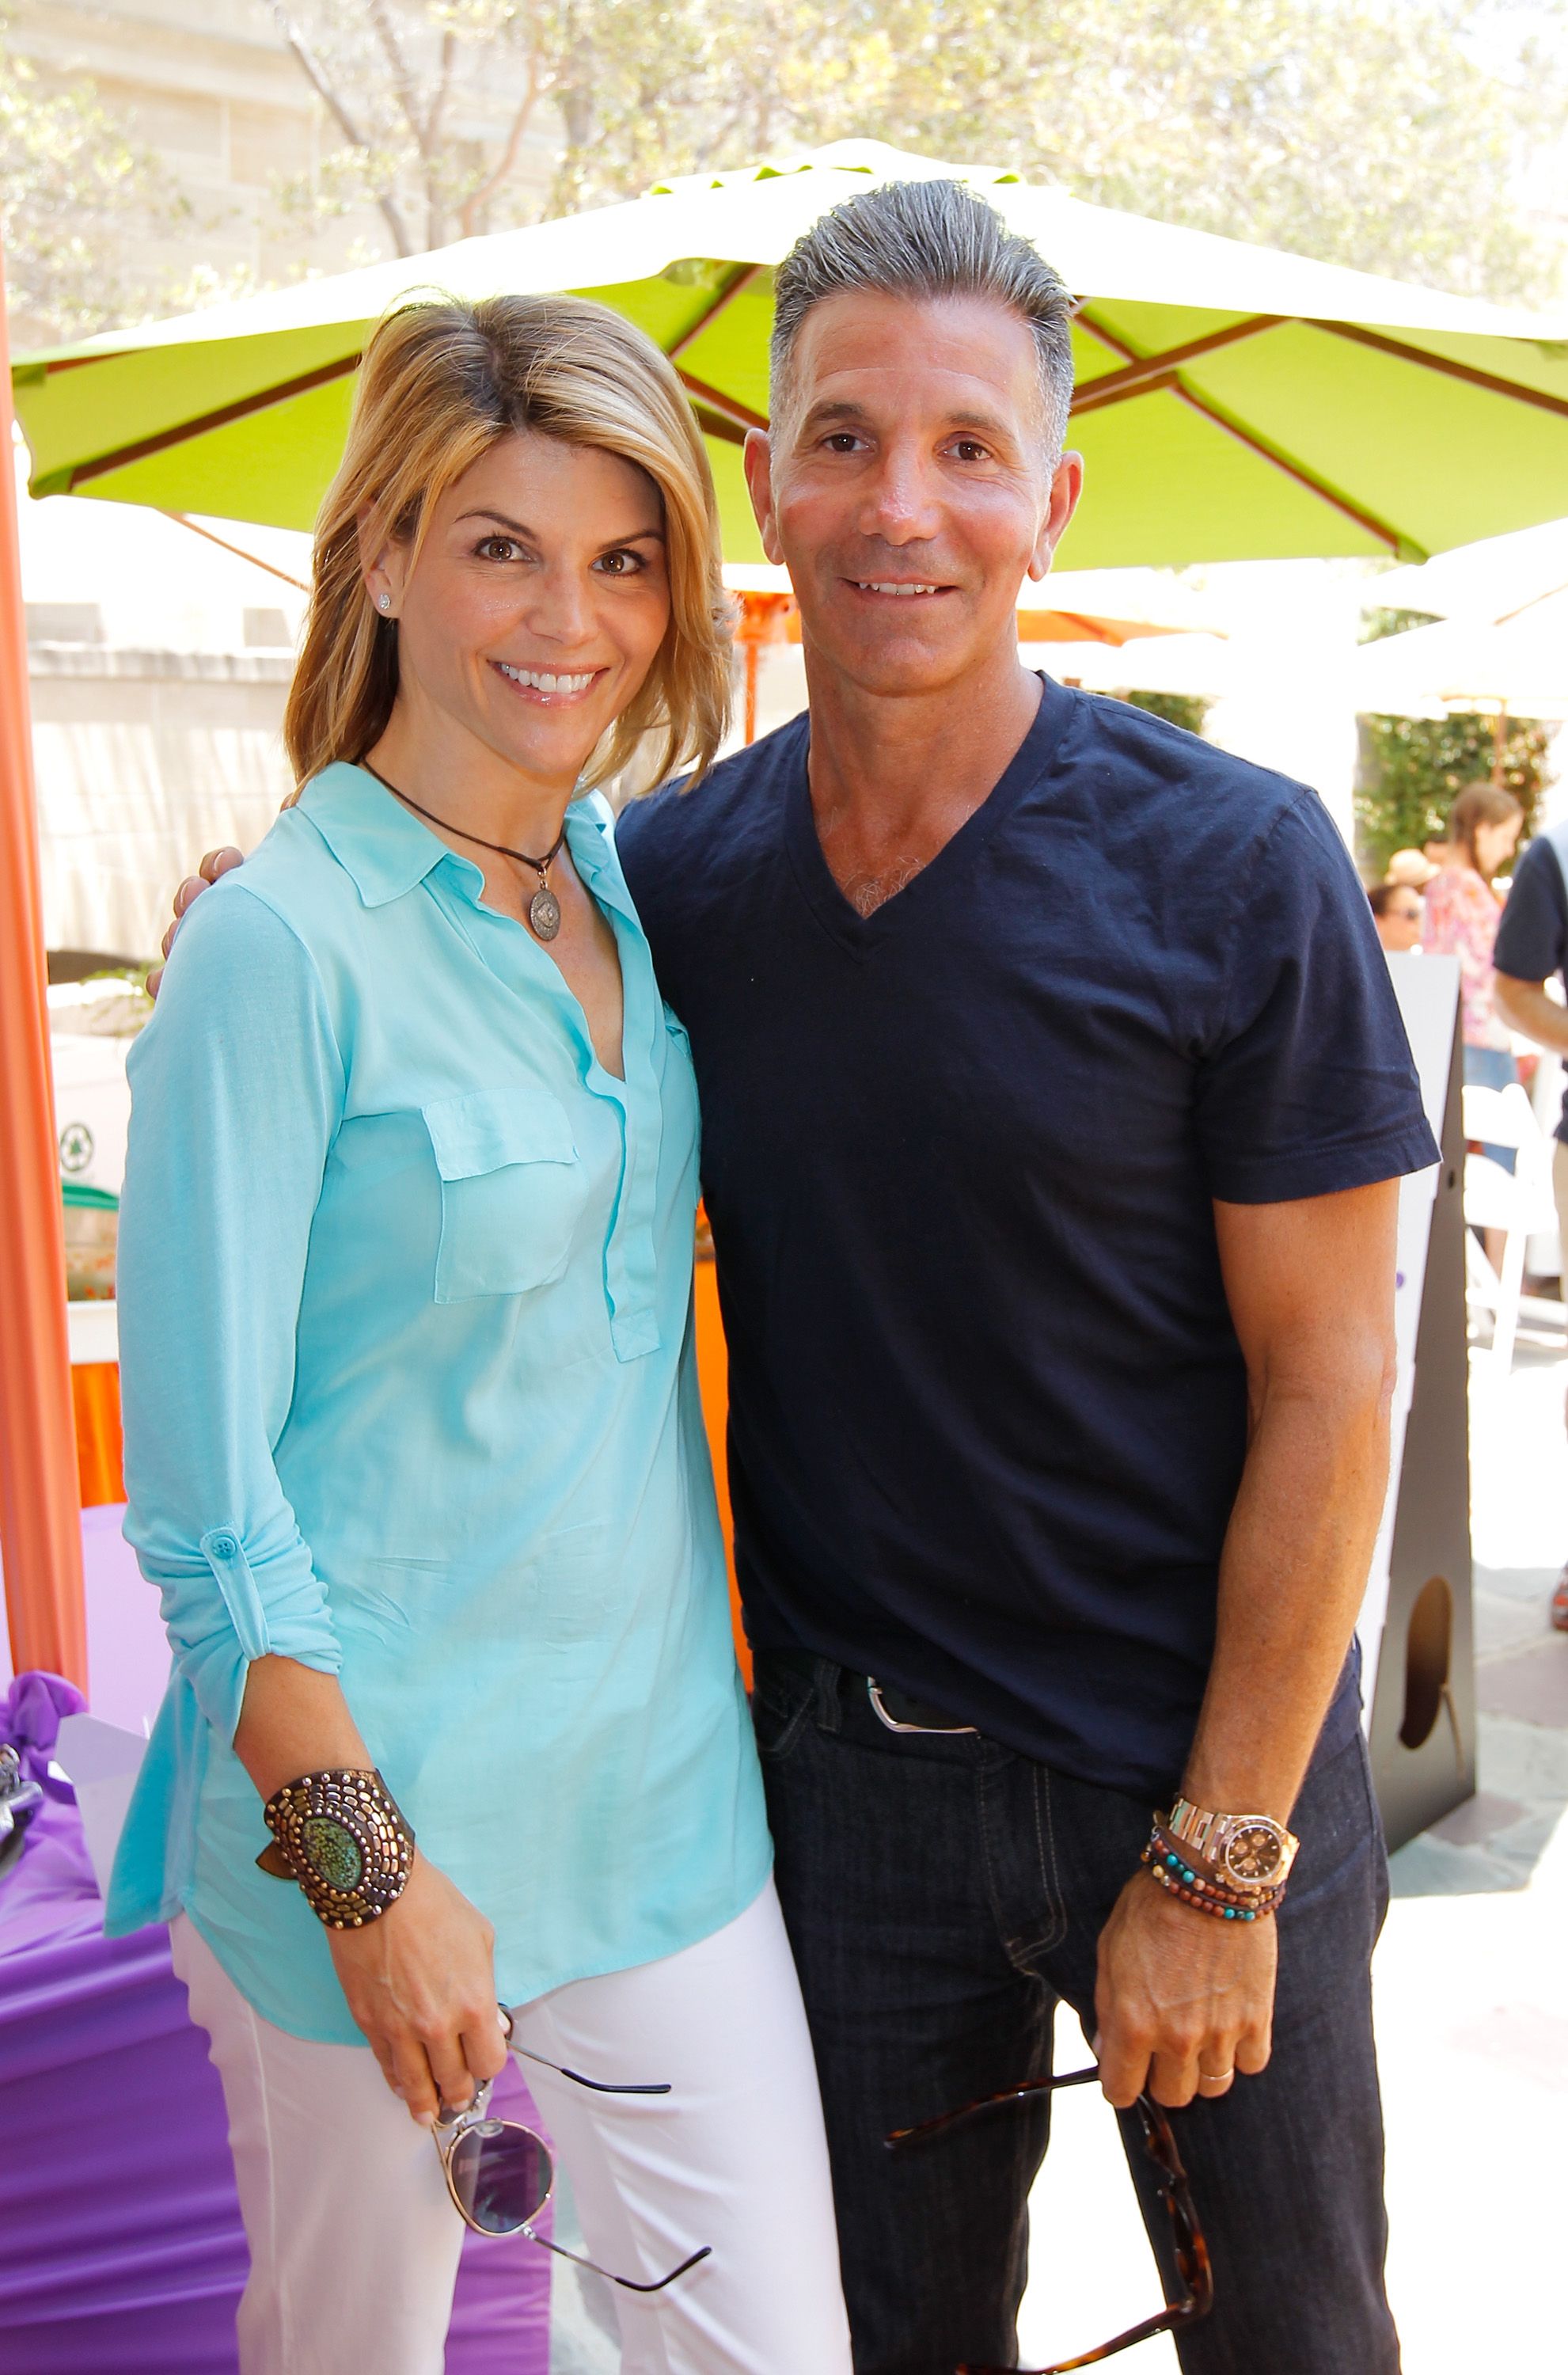 Lori Loughlin and Mossimo Giannulli at 6th Annual Kidstock Music And Arts Festival at Greystone Mansion on June 3, 2012 | Photo: Images